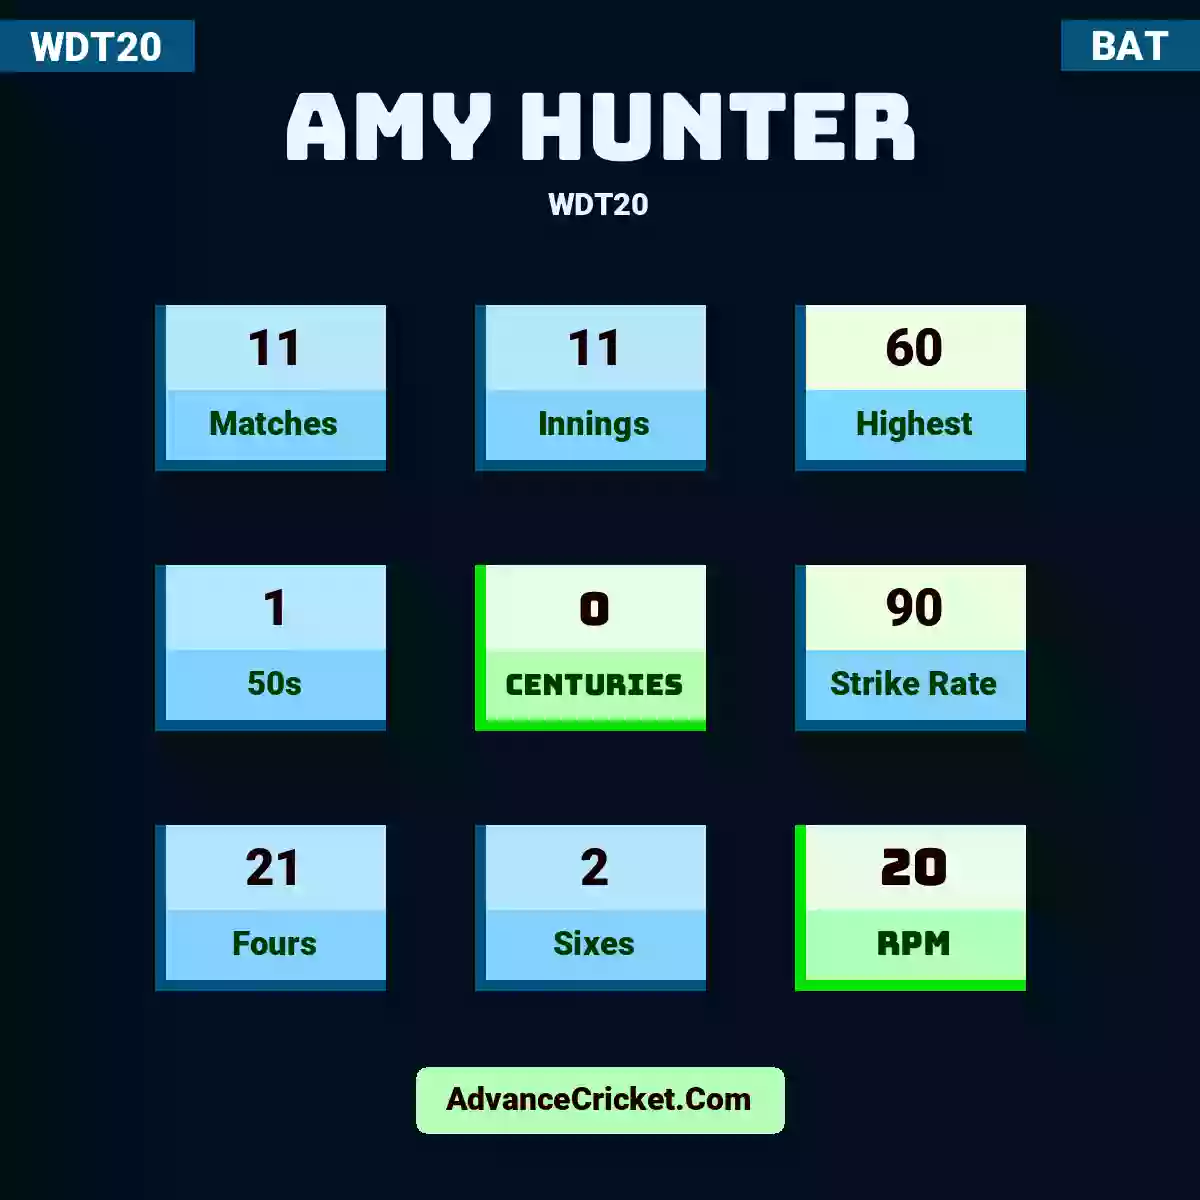 Amy Hunter WDT20 , Amy Hunter played 11 matches, scored 60 runs as highest, 1 half-centuries, and 0 centuries, with a strike rate of 90. A.Hunter hit 21 fours and 2 sixes, with an RPM of 20.